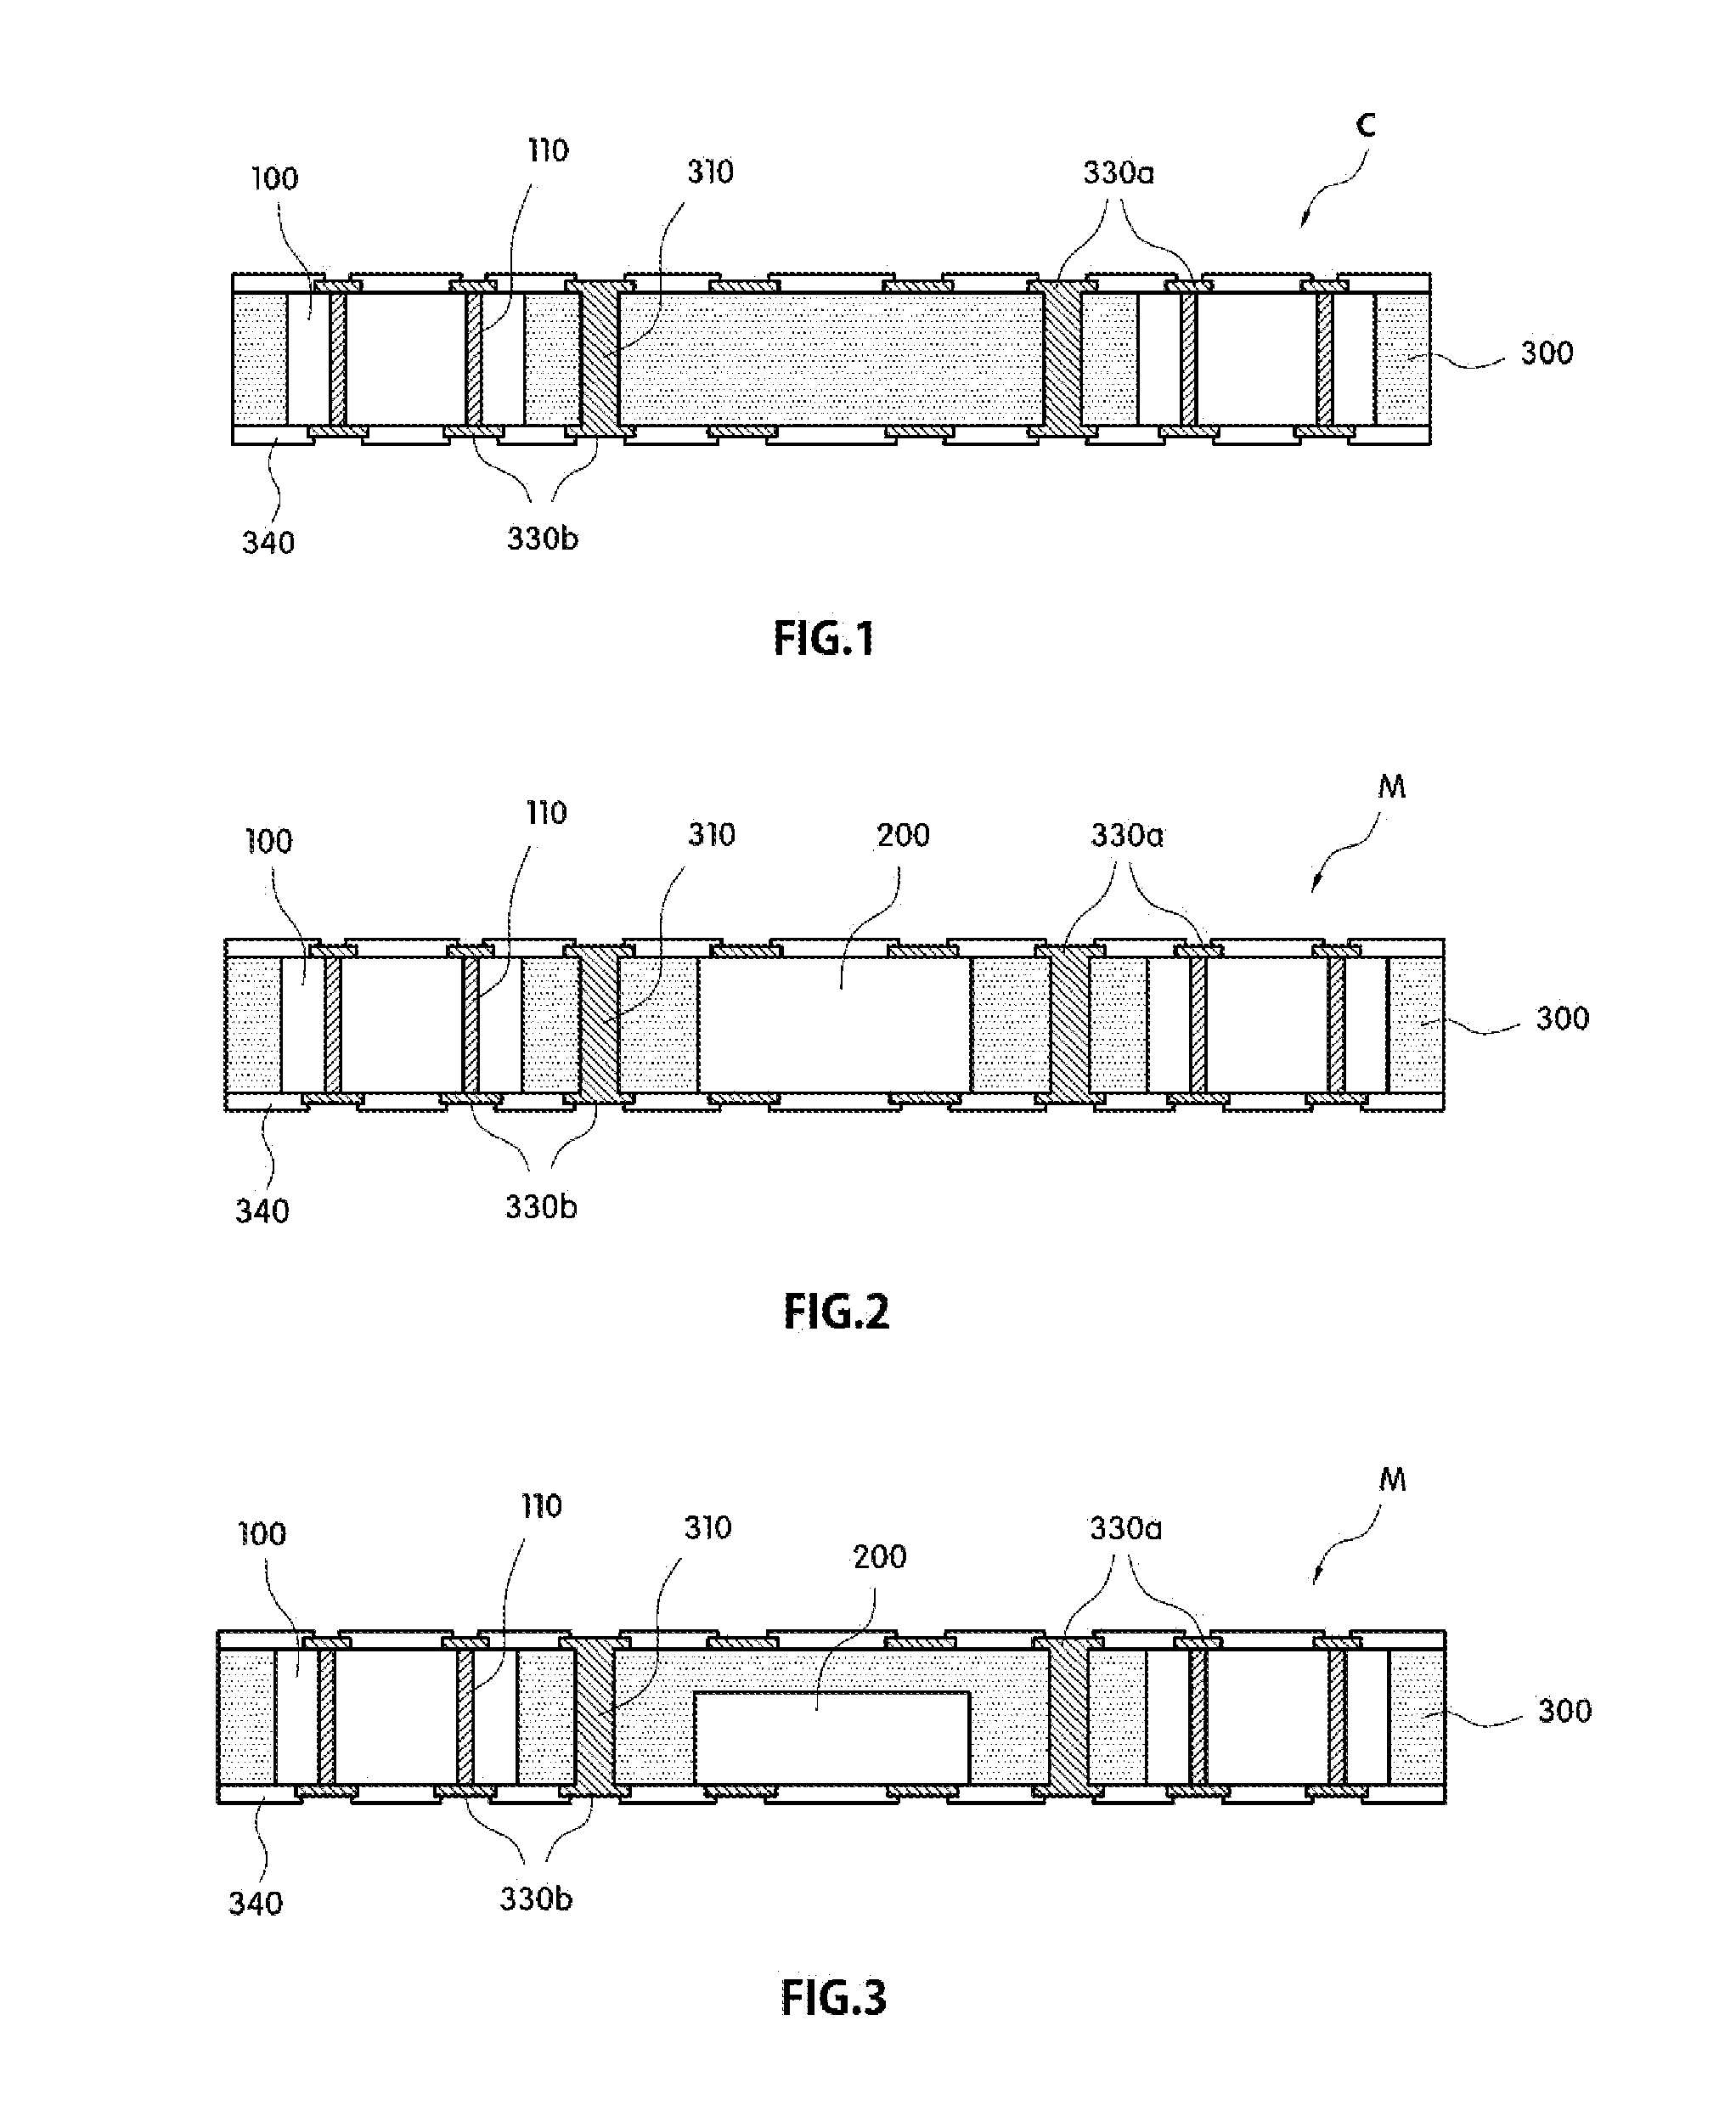 Circuit Board Having Interposer Embedded Therein, Electronic Module Using Same, and Method for Manufacturing Same